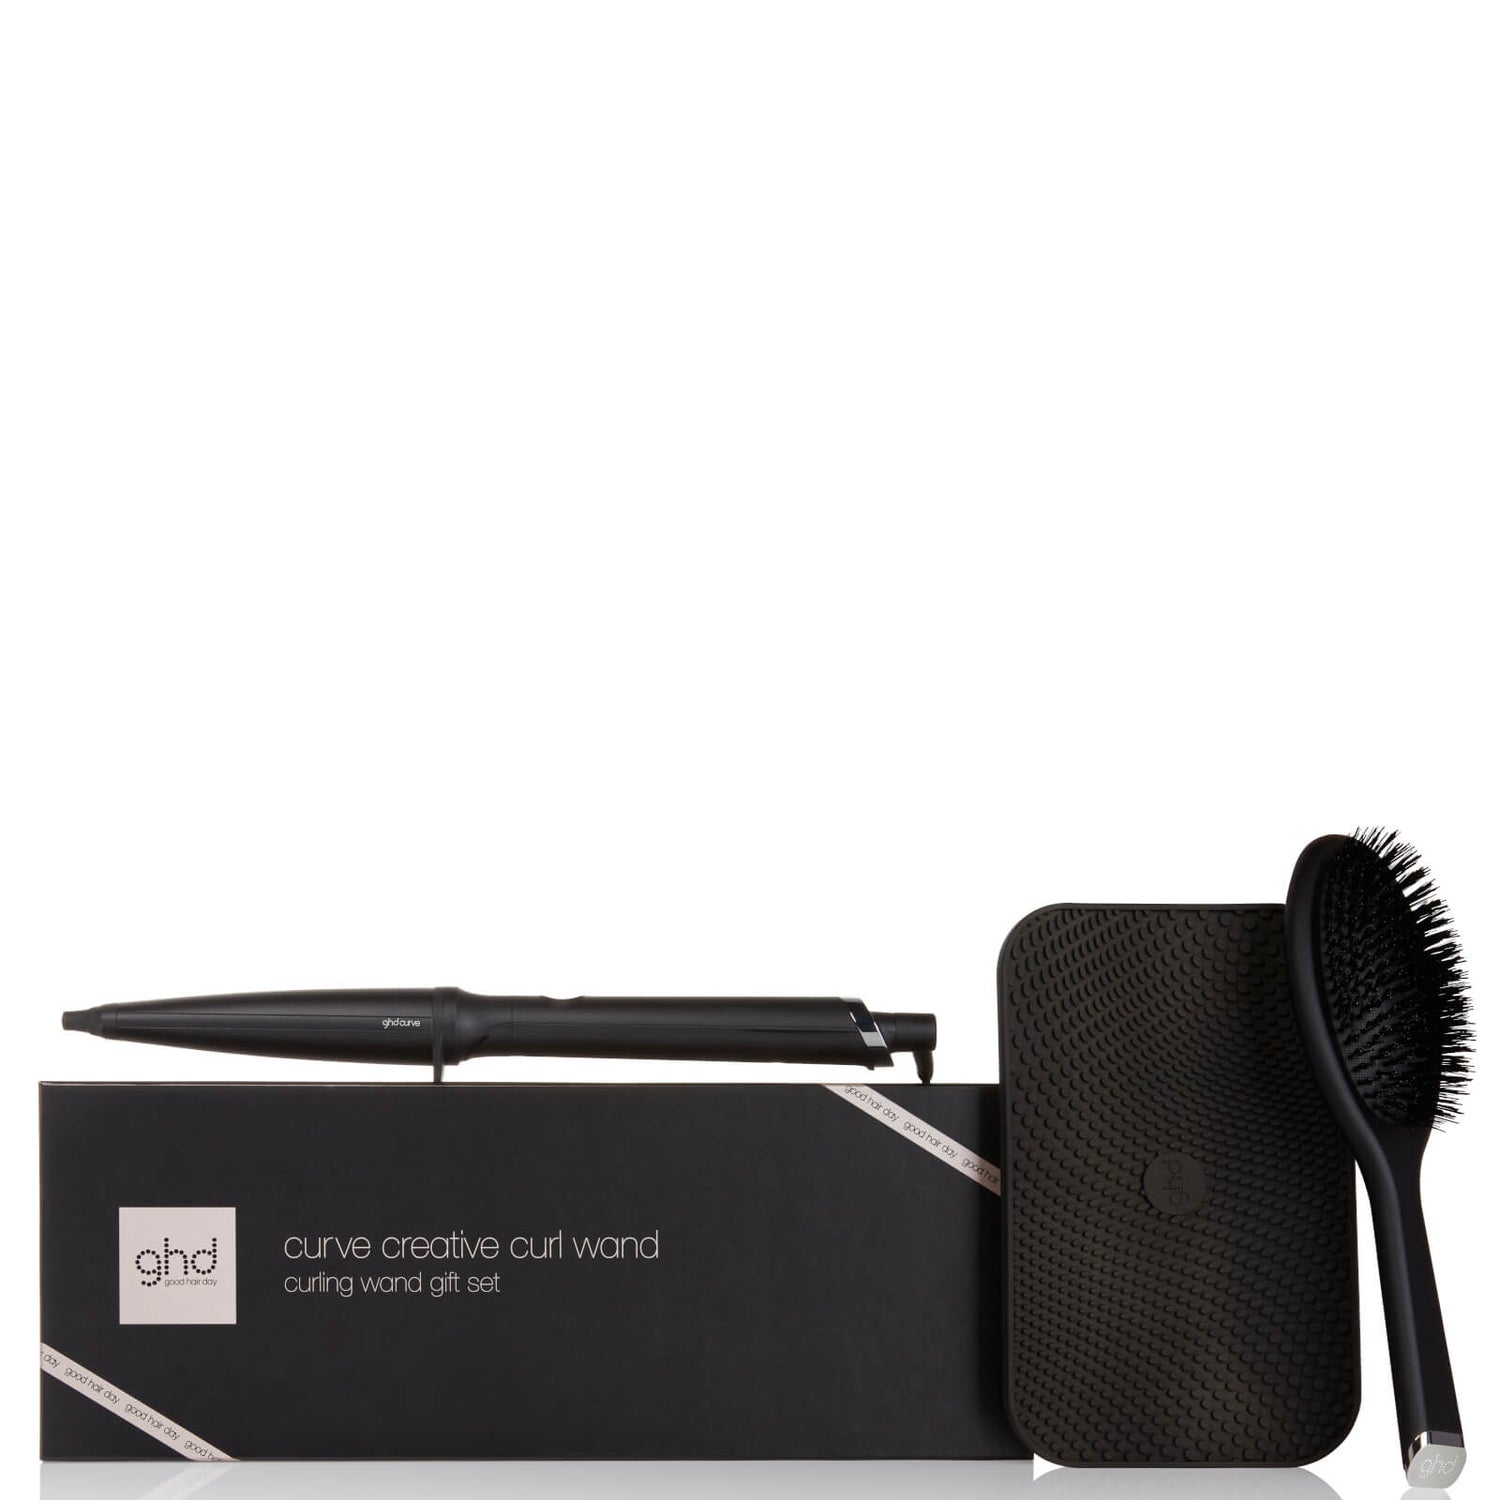 ghd Curve Creative Curl Wand Hair Curler Gift Set (Worth Over $290.00)